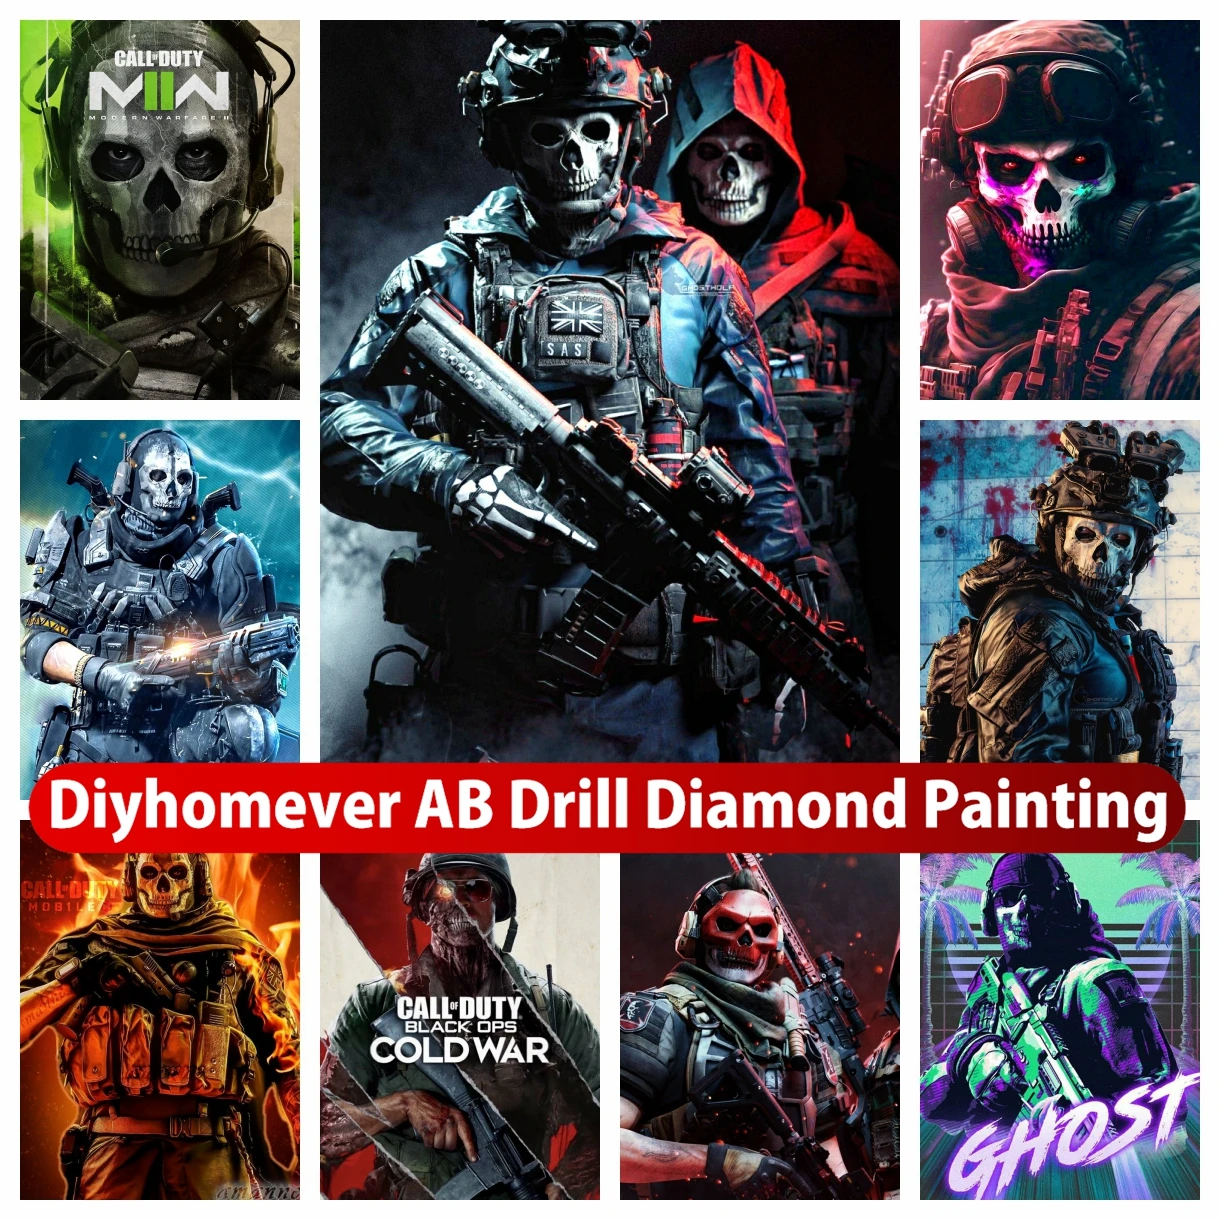 

Call of Duty Ghost 5D DIY AB Diamond Painting Embroidery Game Art Cross Stitch Kits Mosaic Pictures Handmade Home Decor Gift